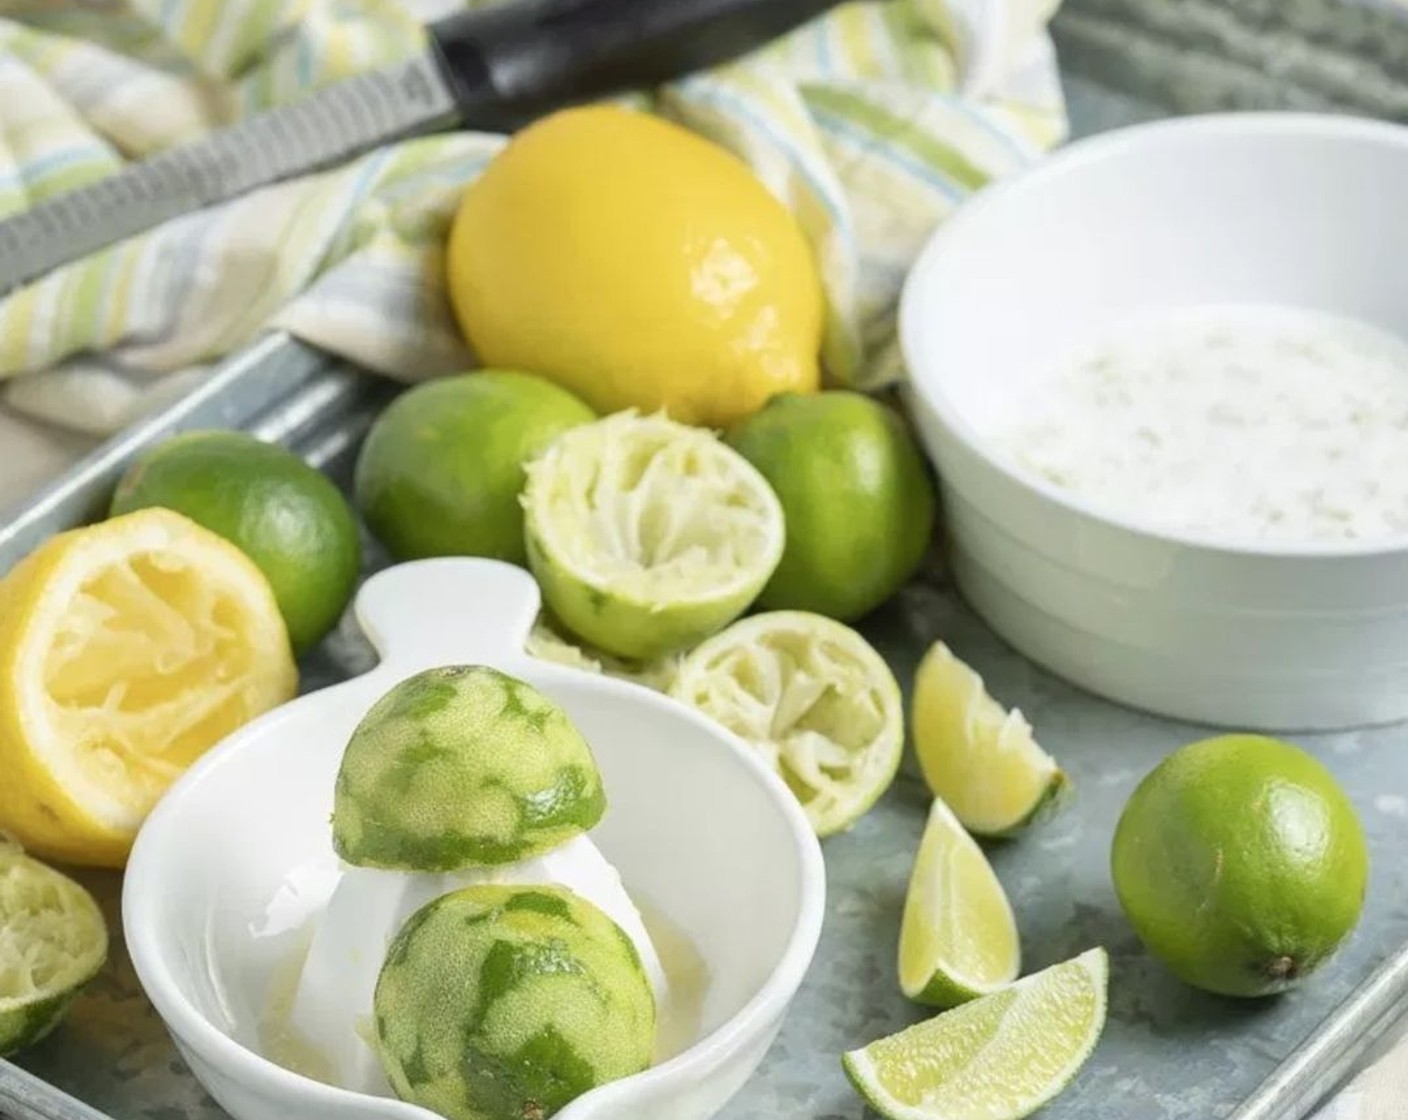 step 1 Bring Water (2 1/2 cups), Granulated Sugar (1/2 cup), and zest from the Limes (4) to a full boil, stirring occasionally to dissolve sugar. Allow mixture to boil for 1 minute. Remove from heat and cool completely. Can be made up to 2 days in advance and kept chilled.